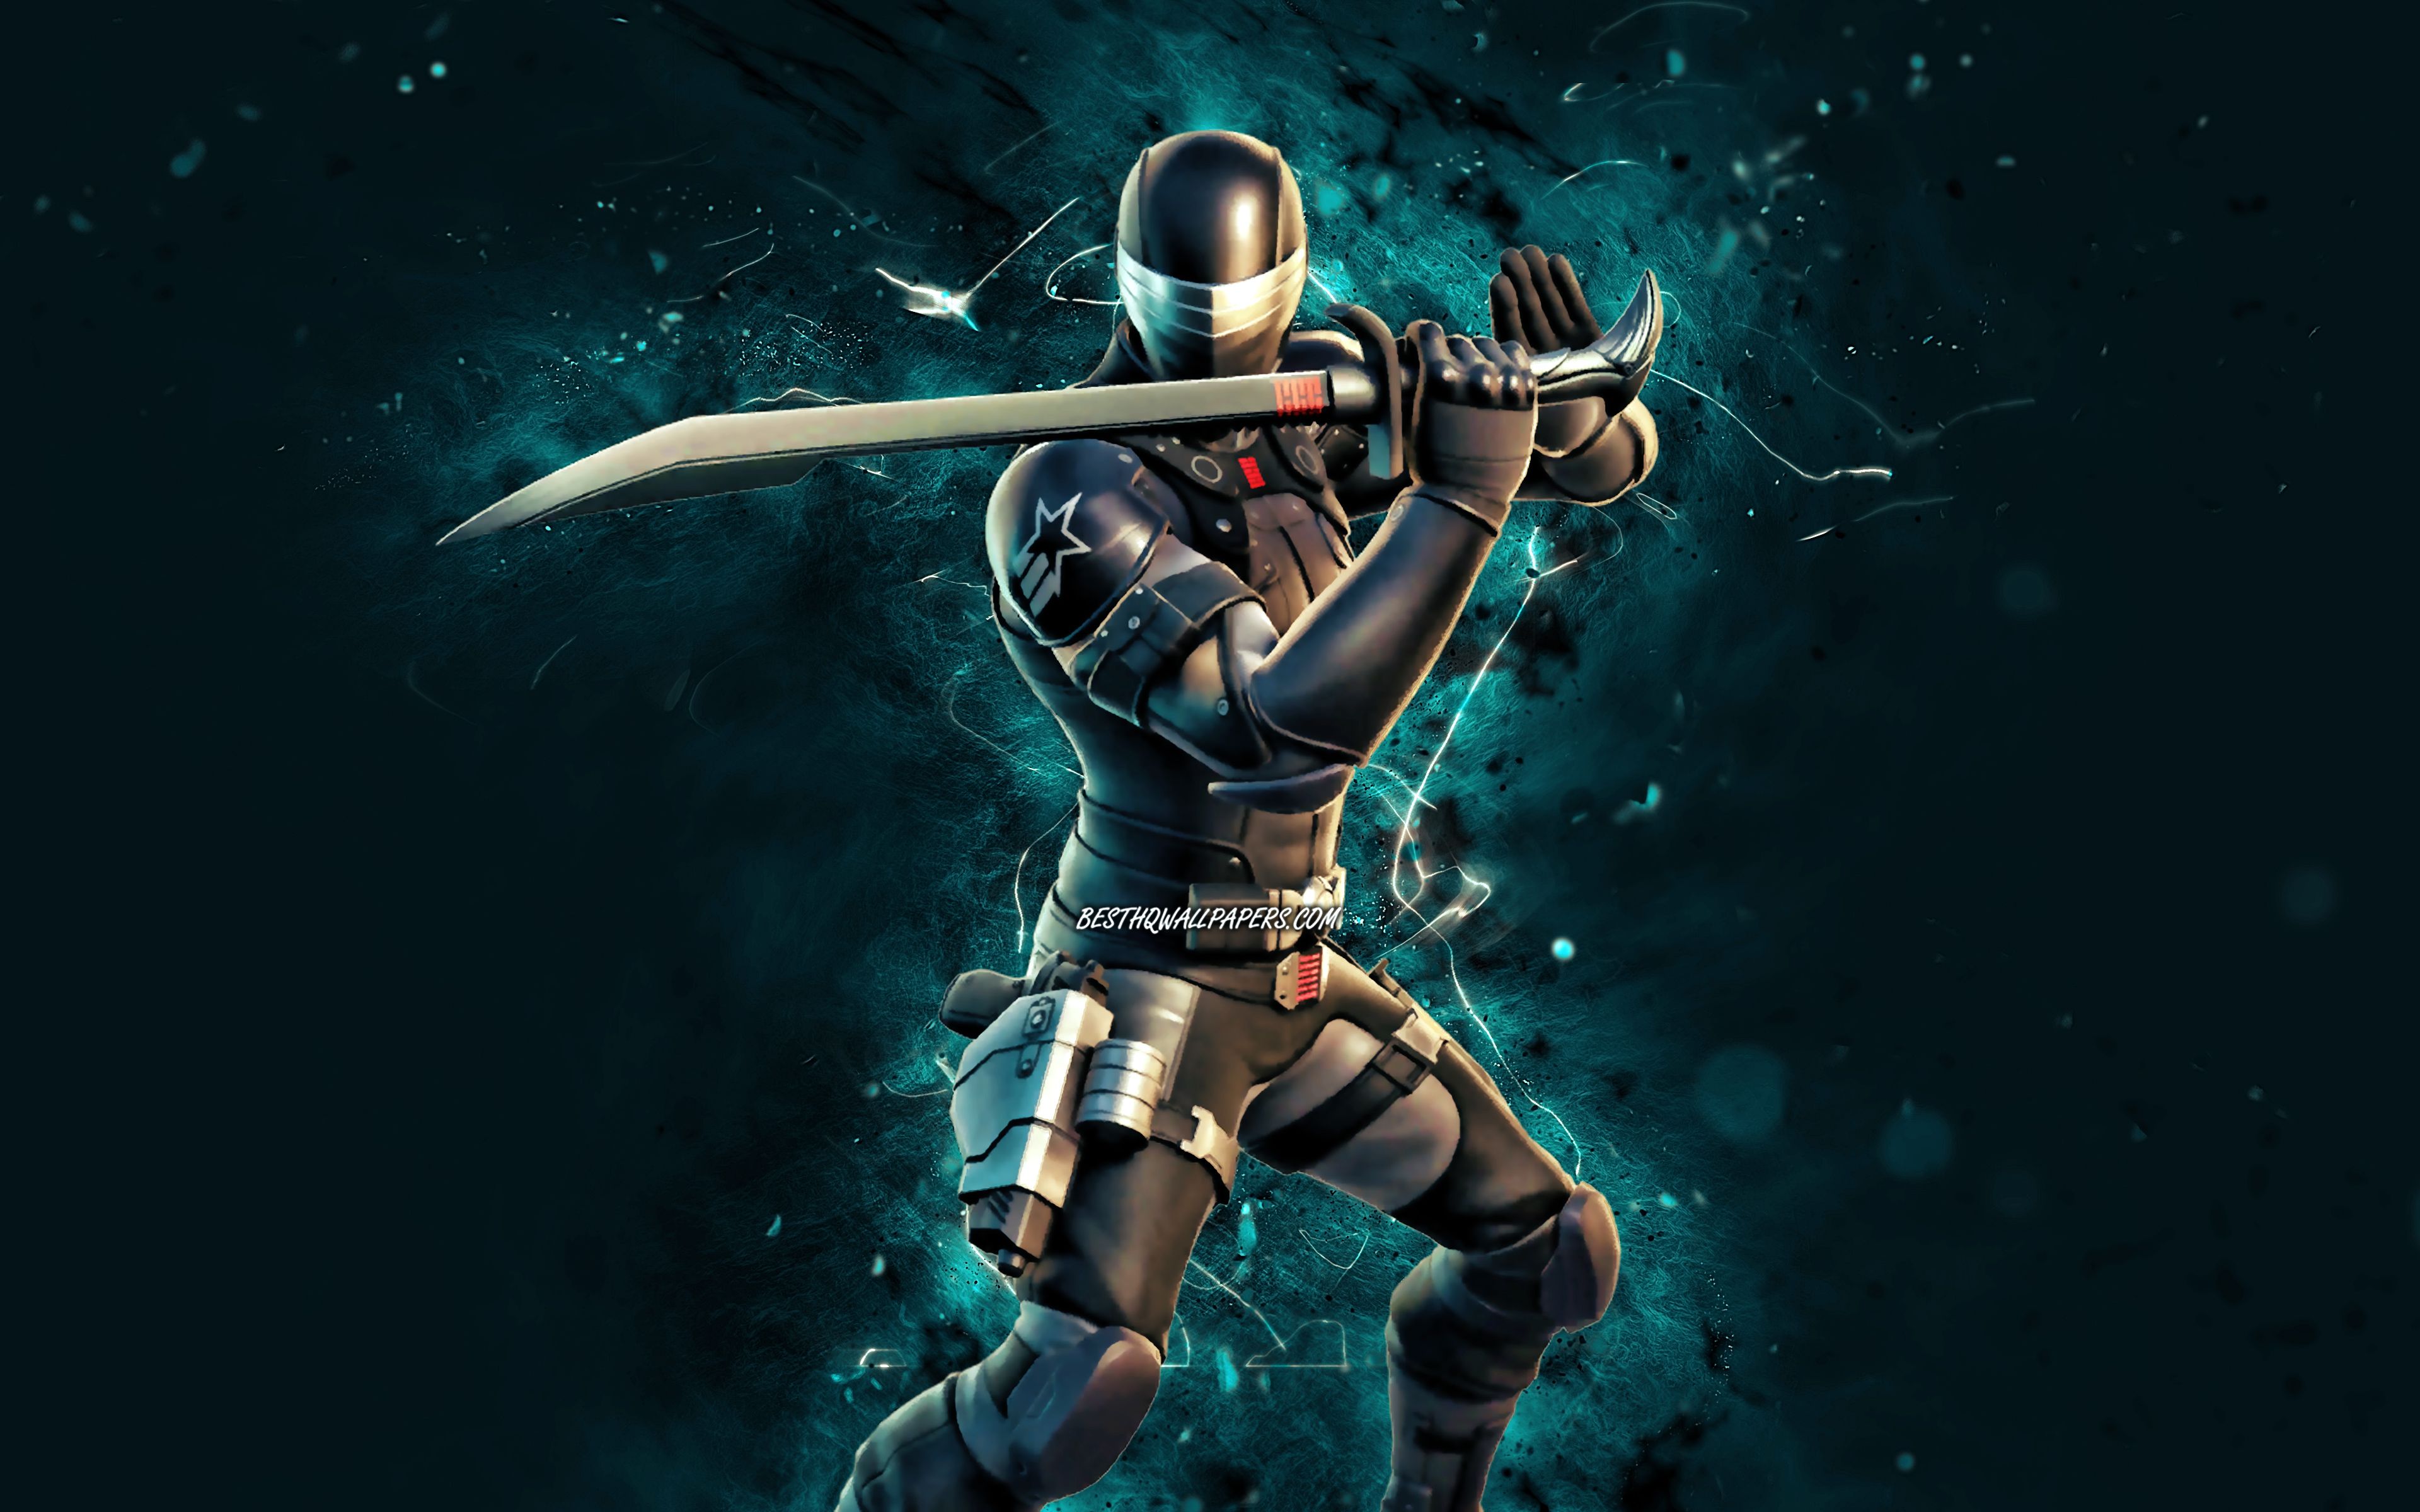 Download wallpaper Snake Eyes, 4k, blue neon lights, Fortnite Battle Royale, Fortnite characters, Snake Eyes Skin, Fortnite, Snake Eyes Fortnite for desktop with resolution 3840x2400. High Quality HD picture wallpaper